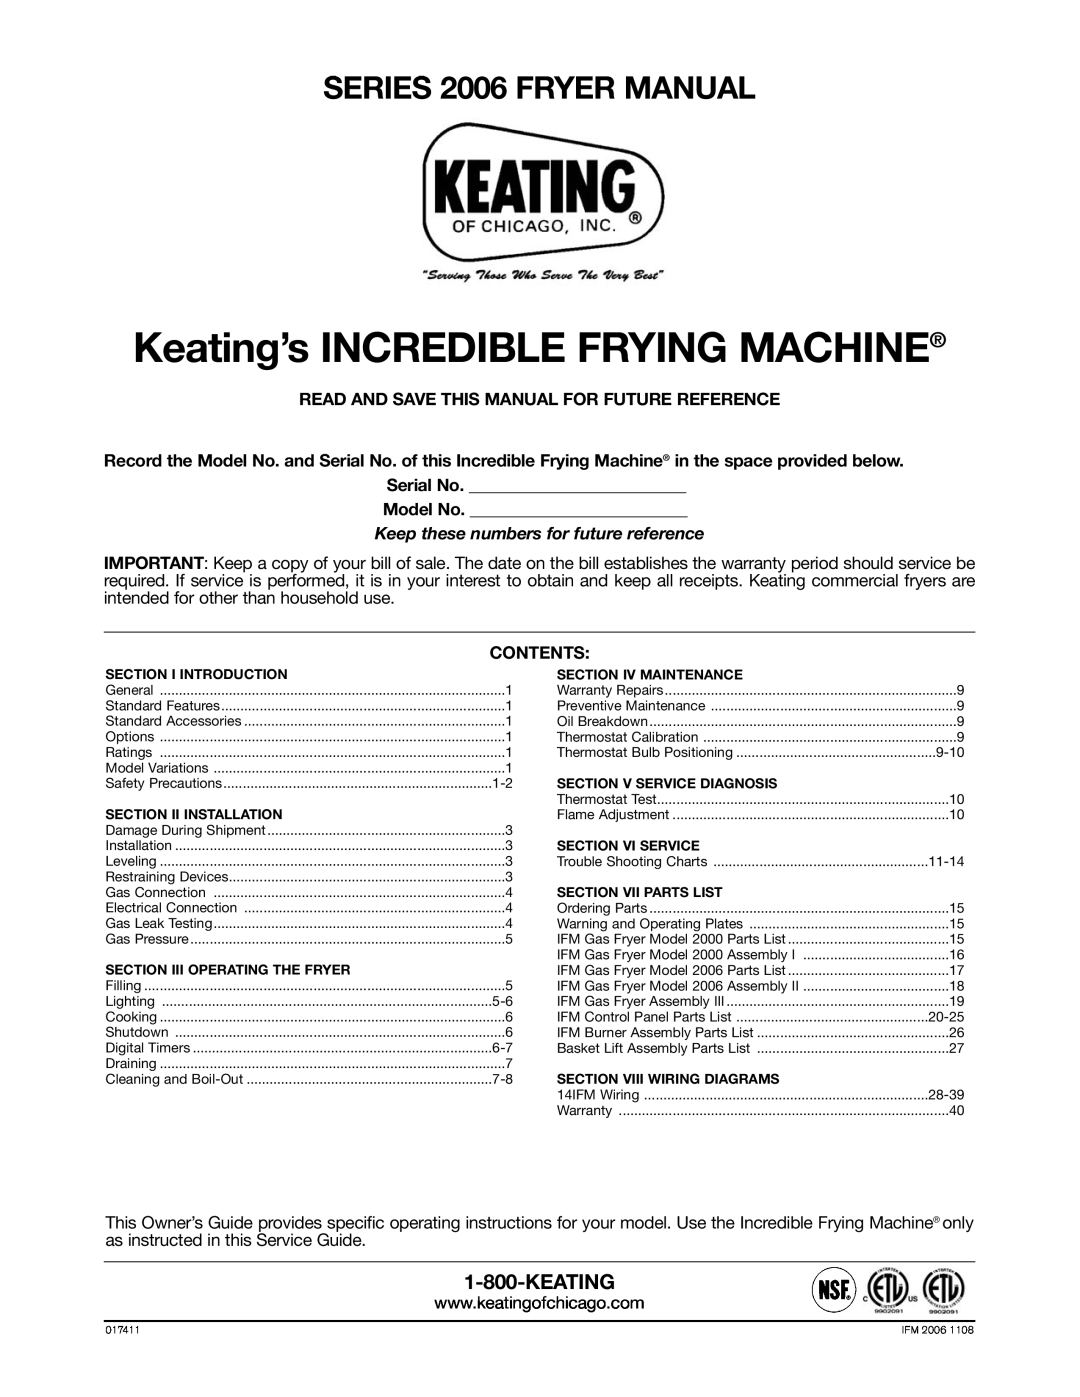 Keating Of Chicago warranty SERIES 2006 FRYER MANUAL, Keating’s INCREDIBLE FRYING MACHINE, Model No, Contents 